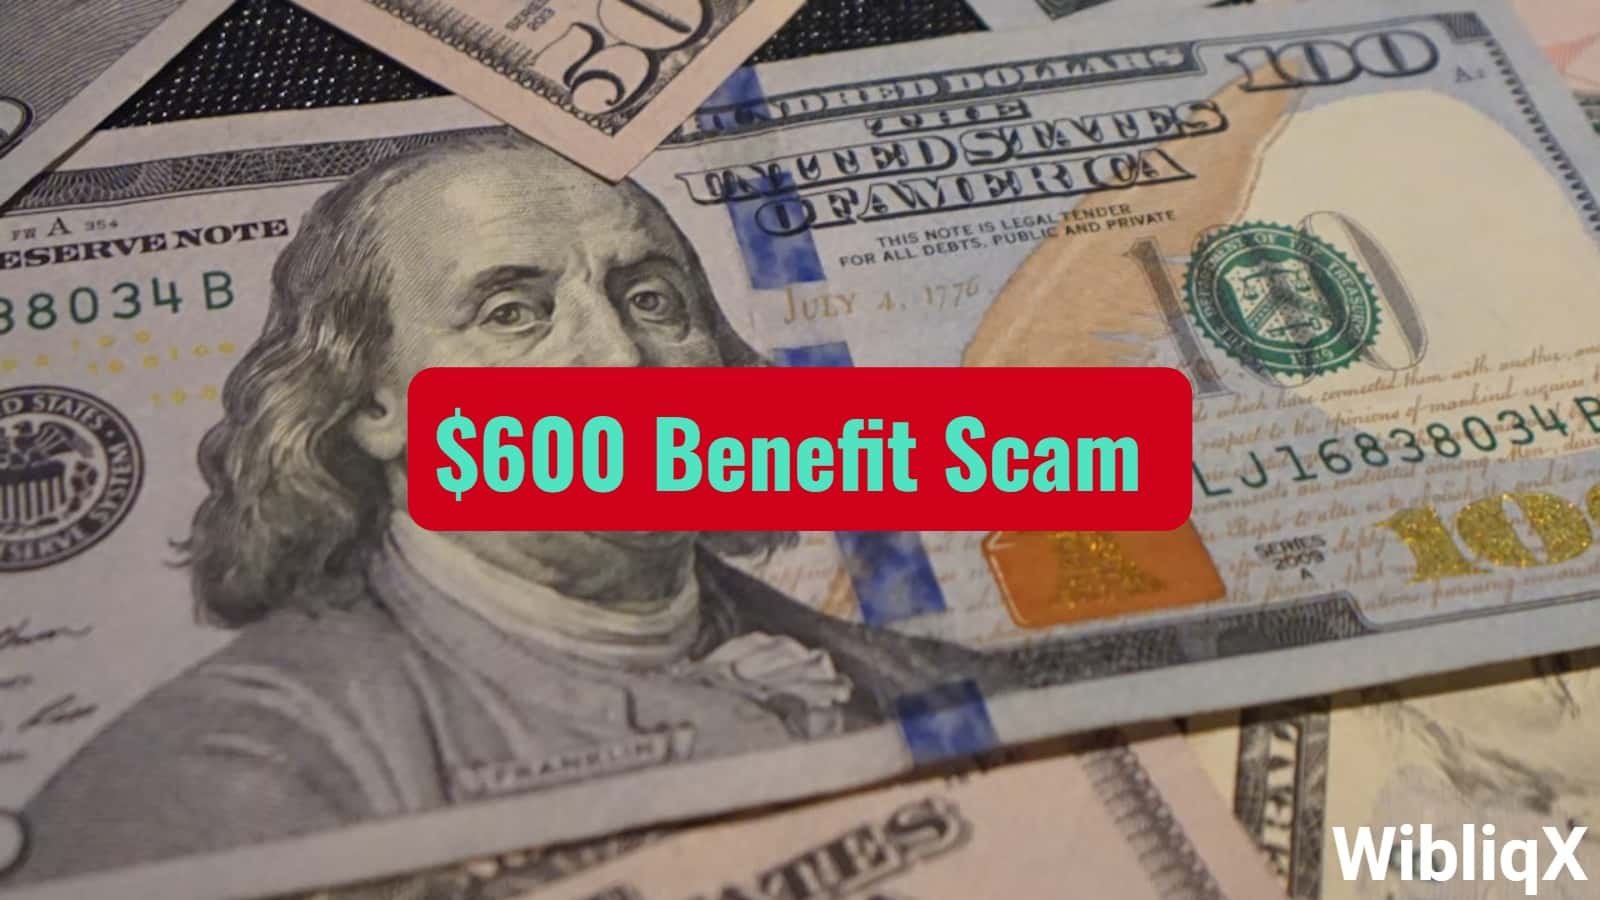 US Social Security Administration Office Warns of $600 Benefit Scam Involving Fake Cost of Living Increase